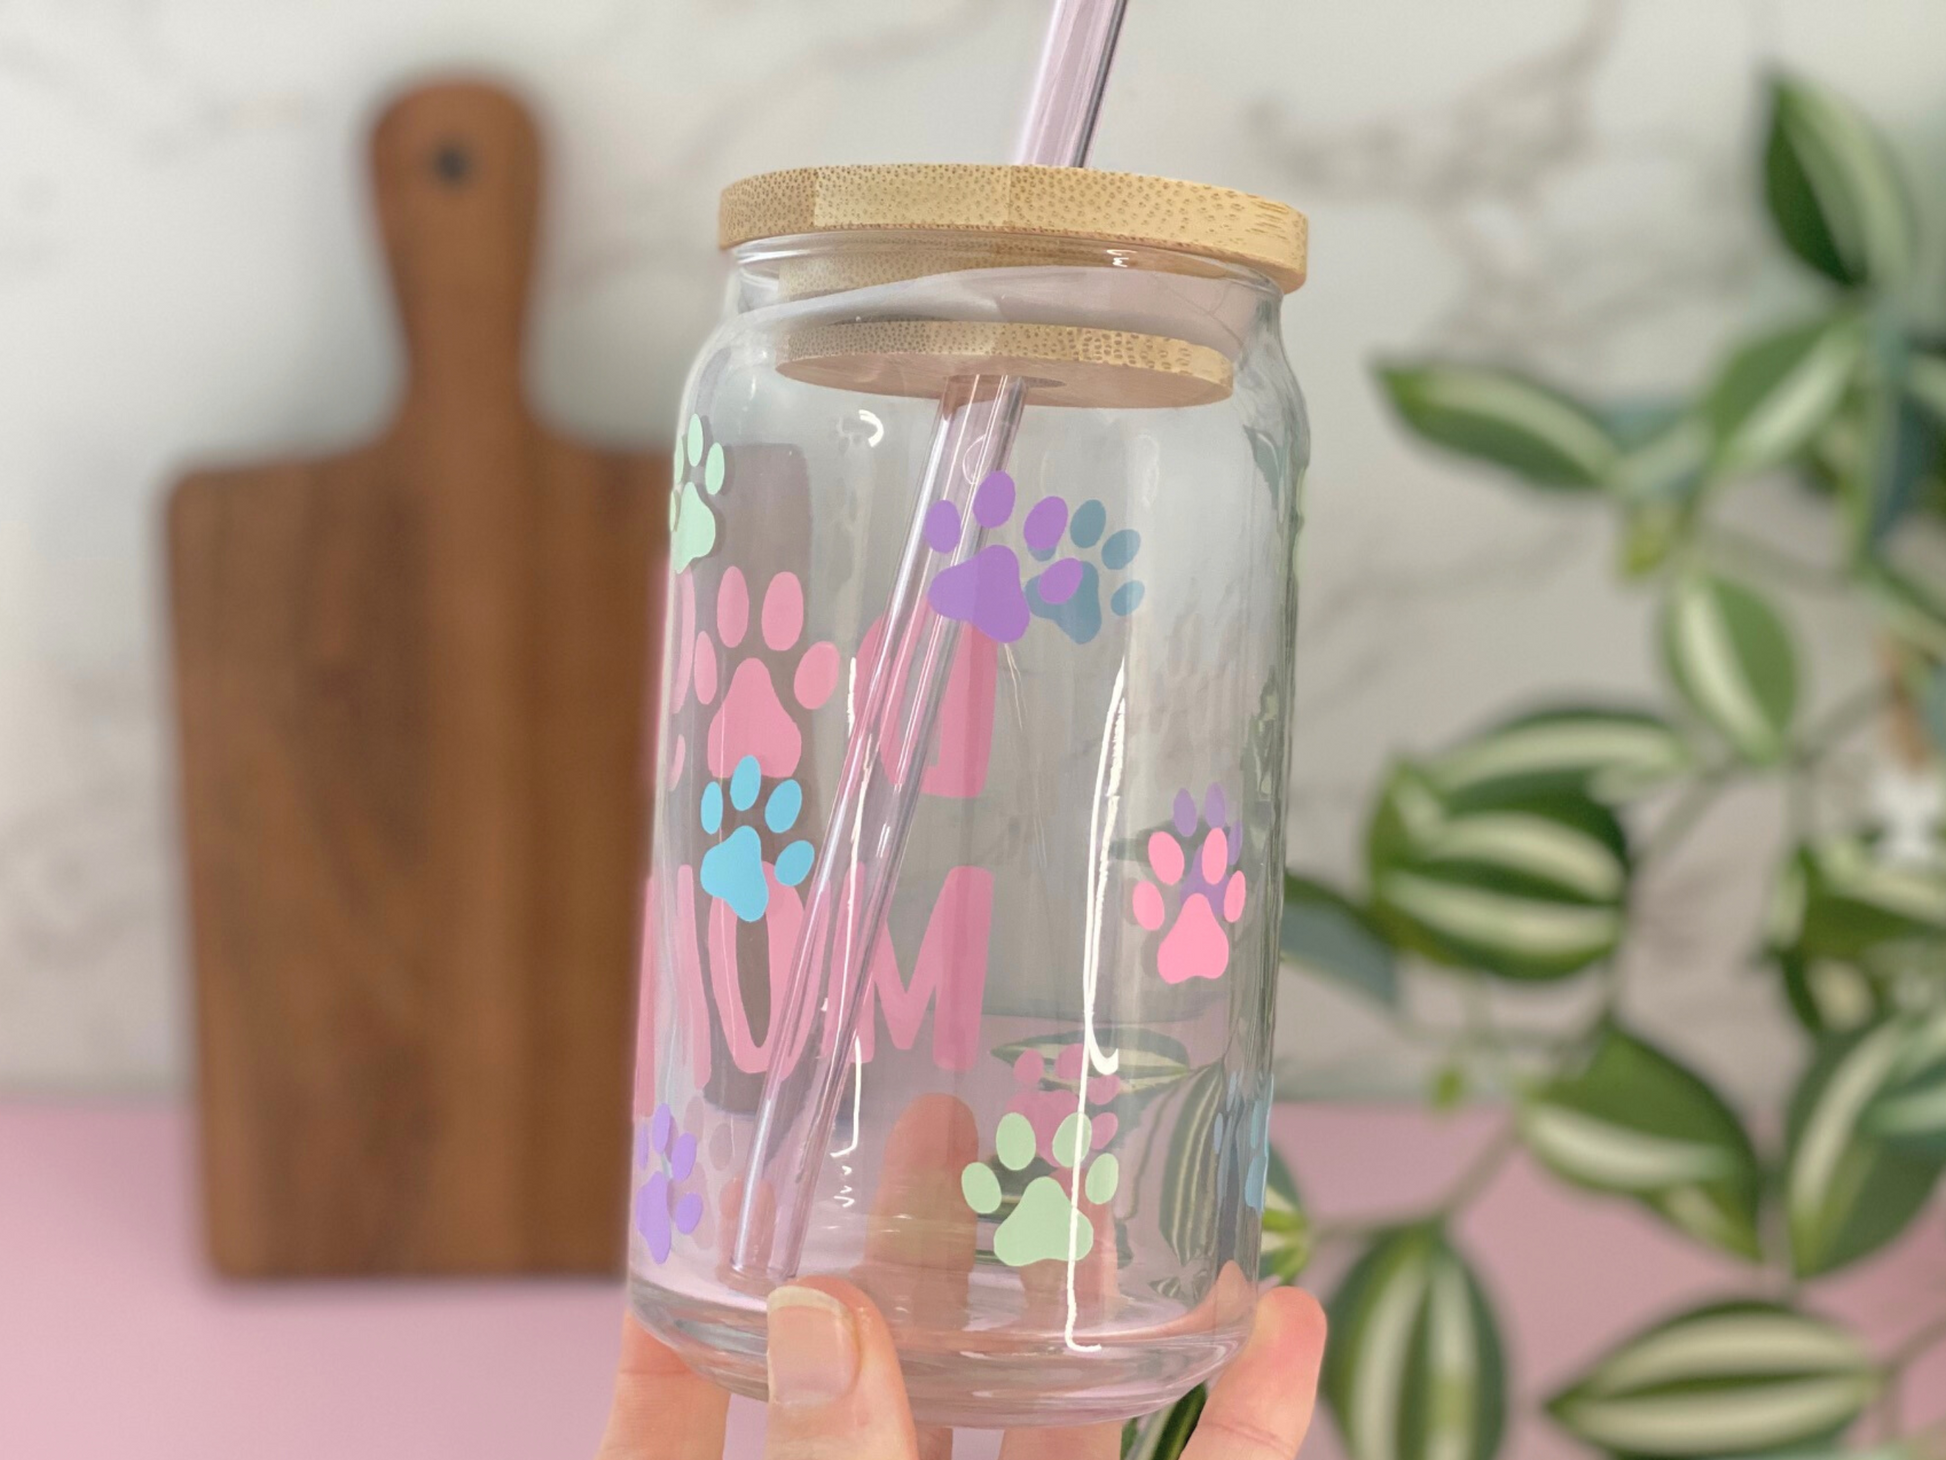 Dog mom glass cup, best dog mom coffee cup, coffee cup for dog moms, iced coffee cup for dog lovers, gifts for dog moms, iced coffee glass cup, beer can glass cup